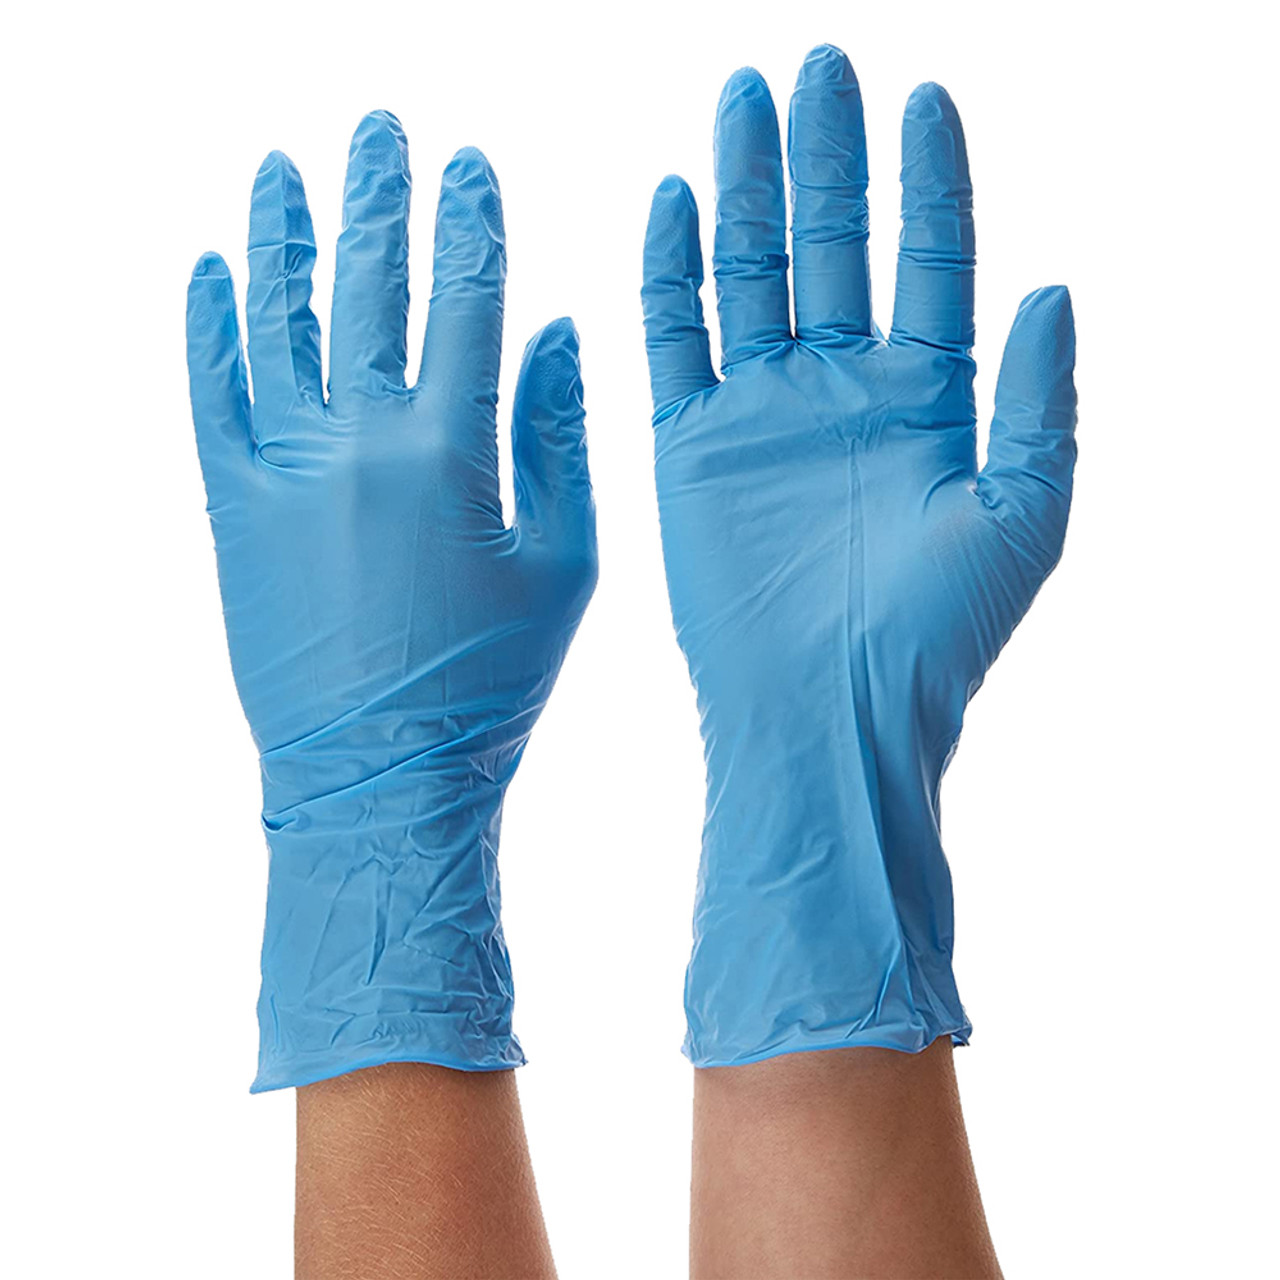 Powder-Free Disposable Extra Thick Blue Nitrile Gloves, 100 ct. product image